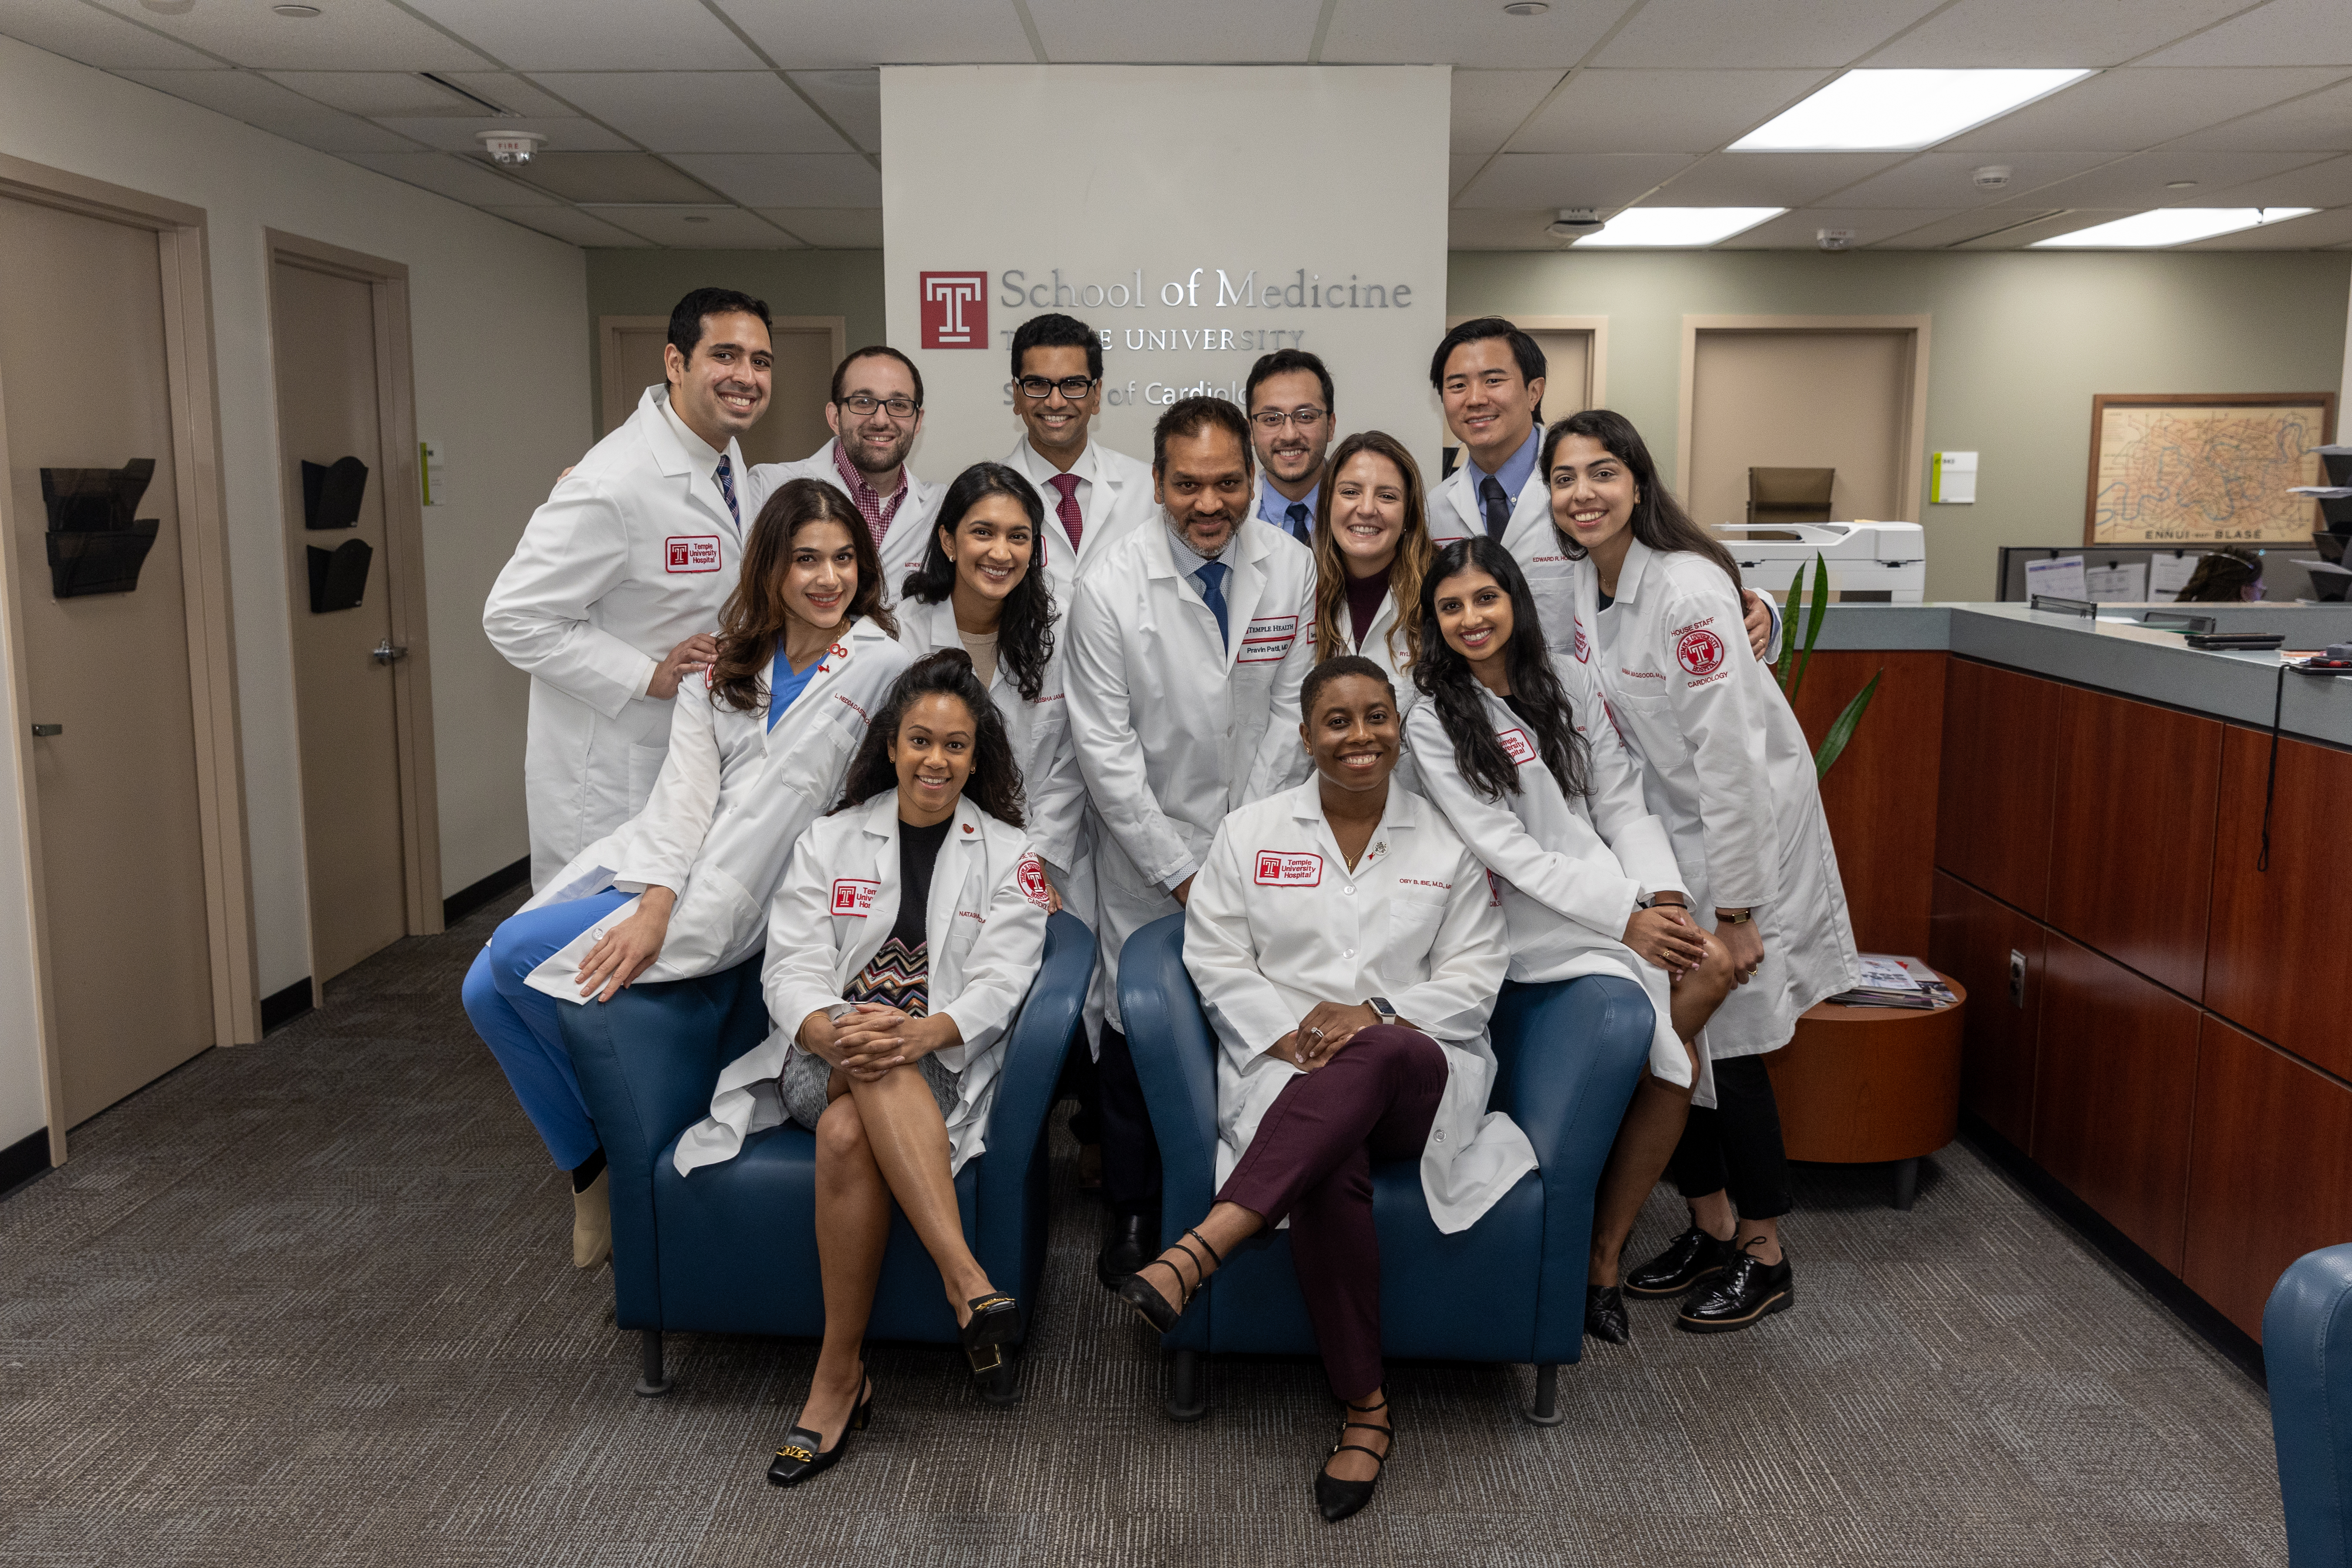 Members of the Cardiology Group in white coats, smiling